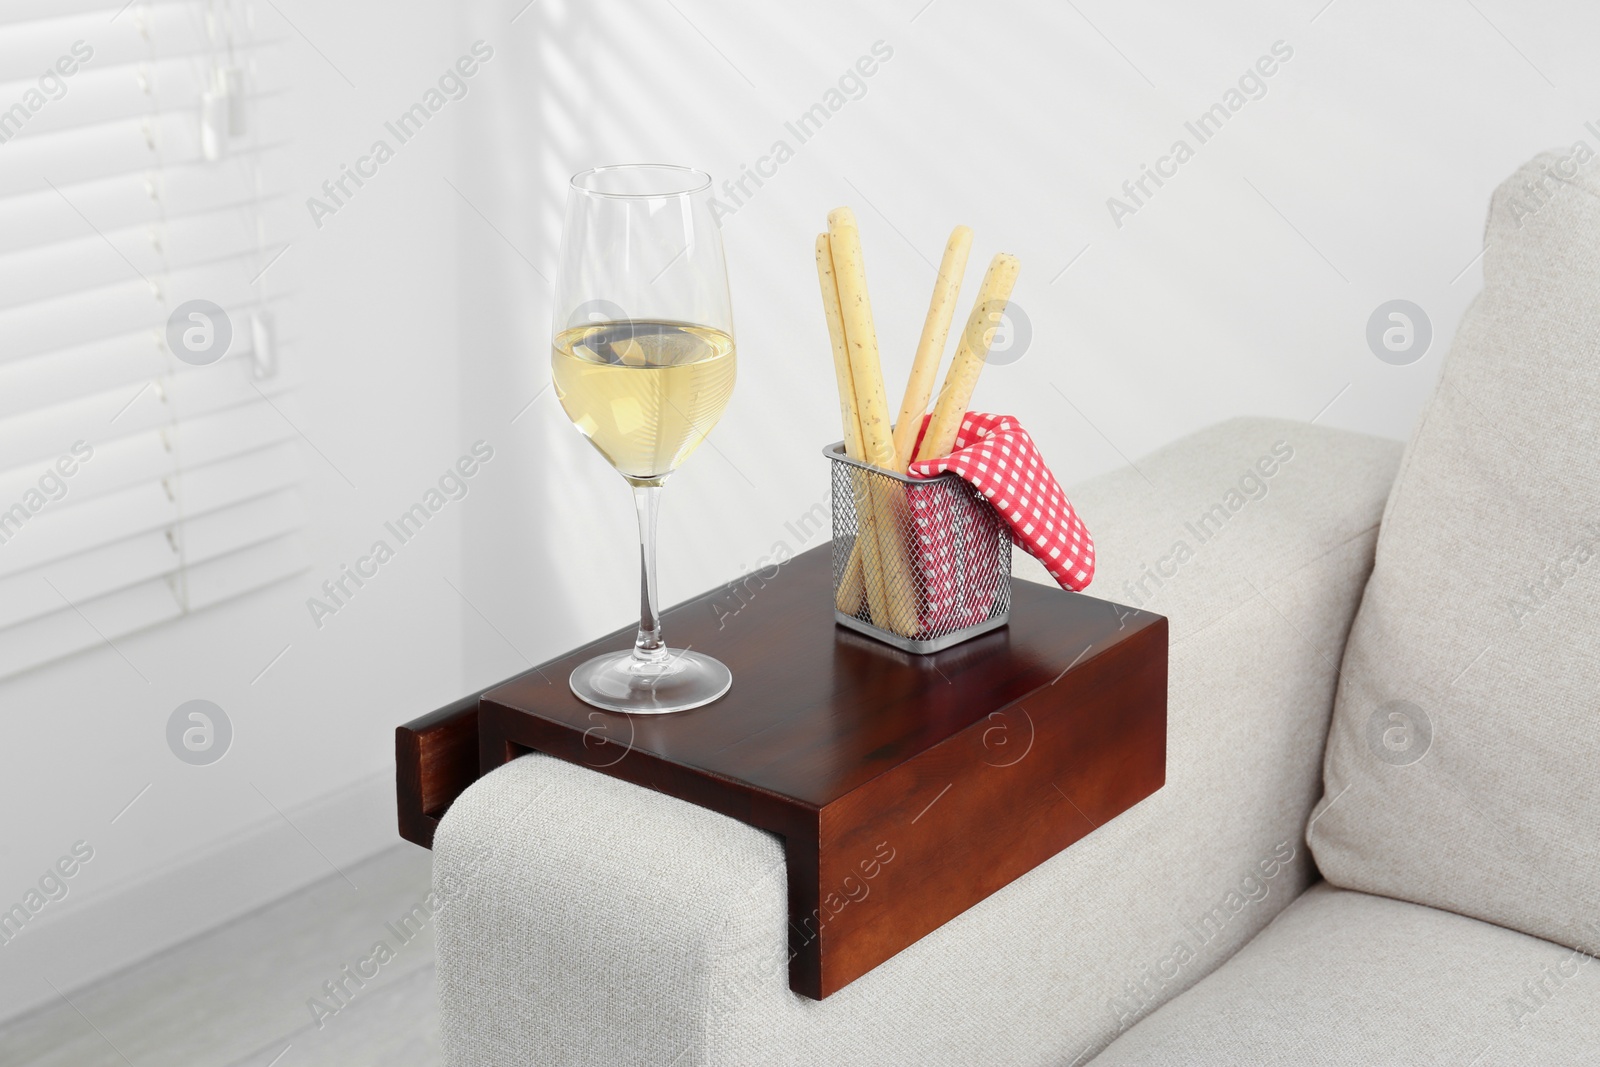 Photo of Glass of white wine and breadsticks on sofa with wooden armrest table in room. Interior element